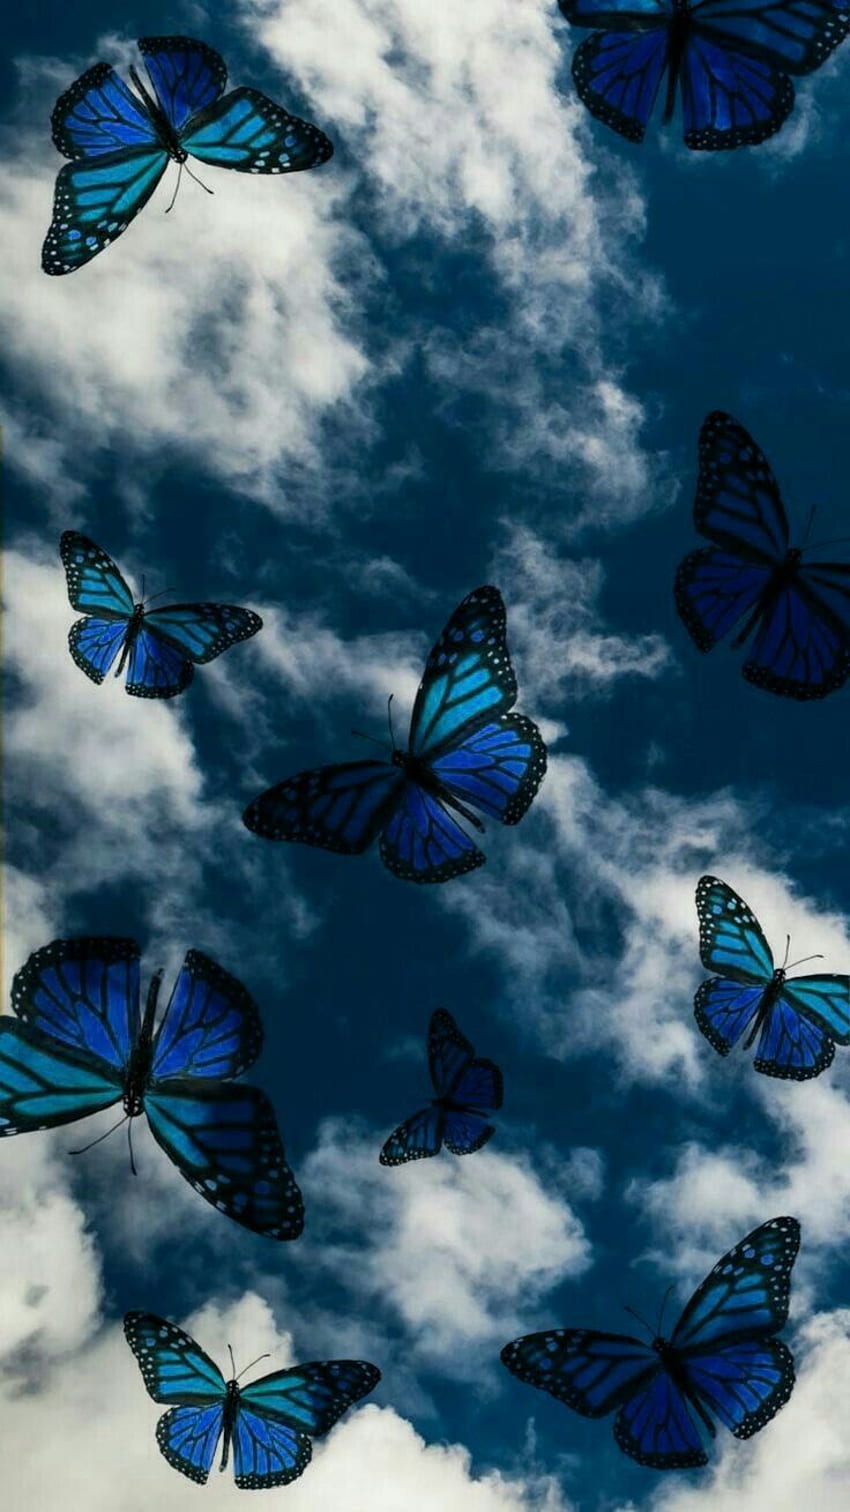 Blue butterfly wallpaper for phone and desktop. - Butterfly